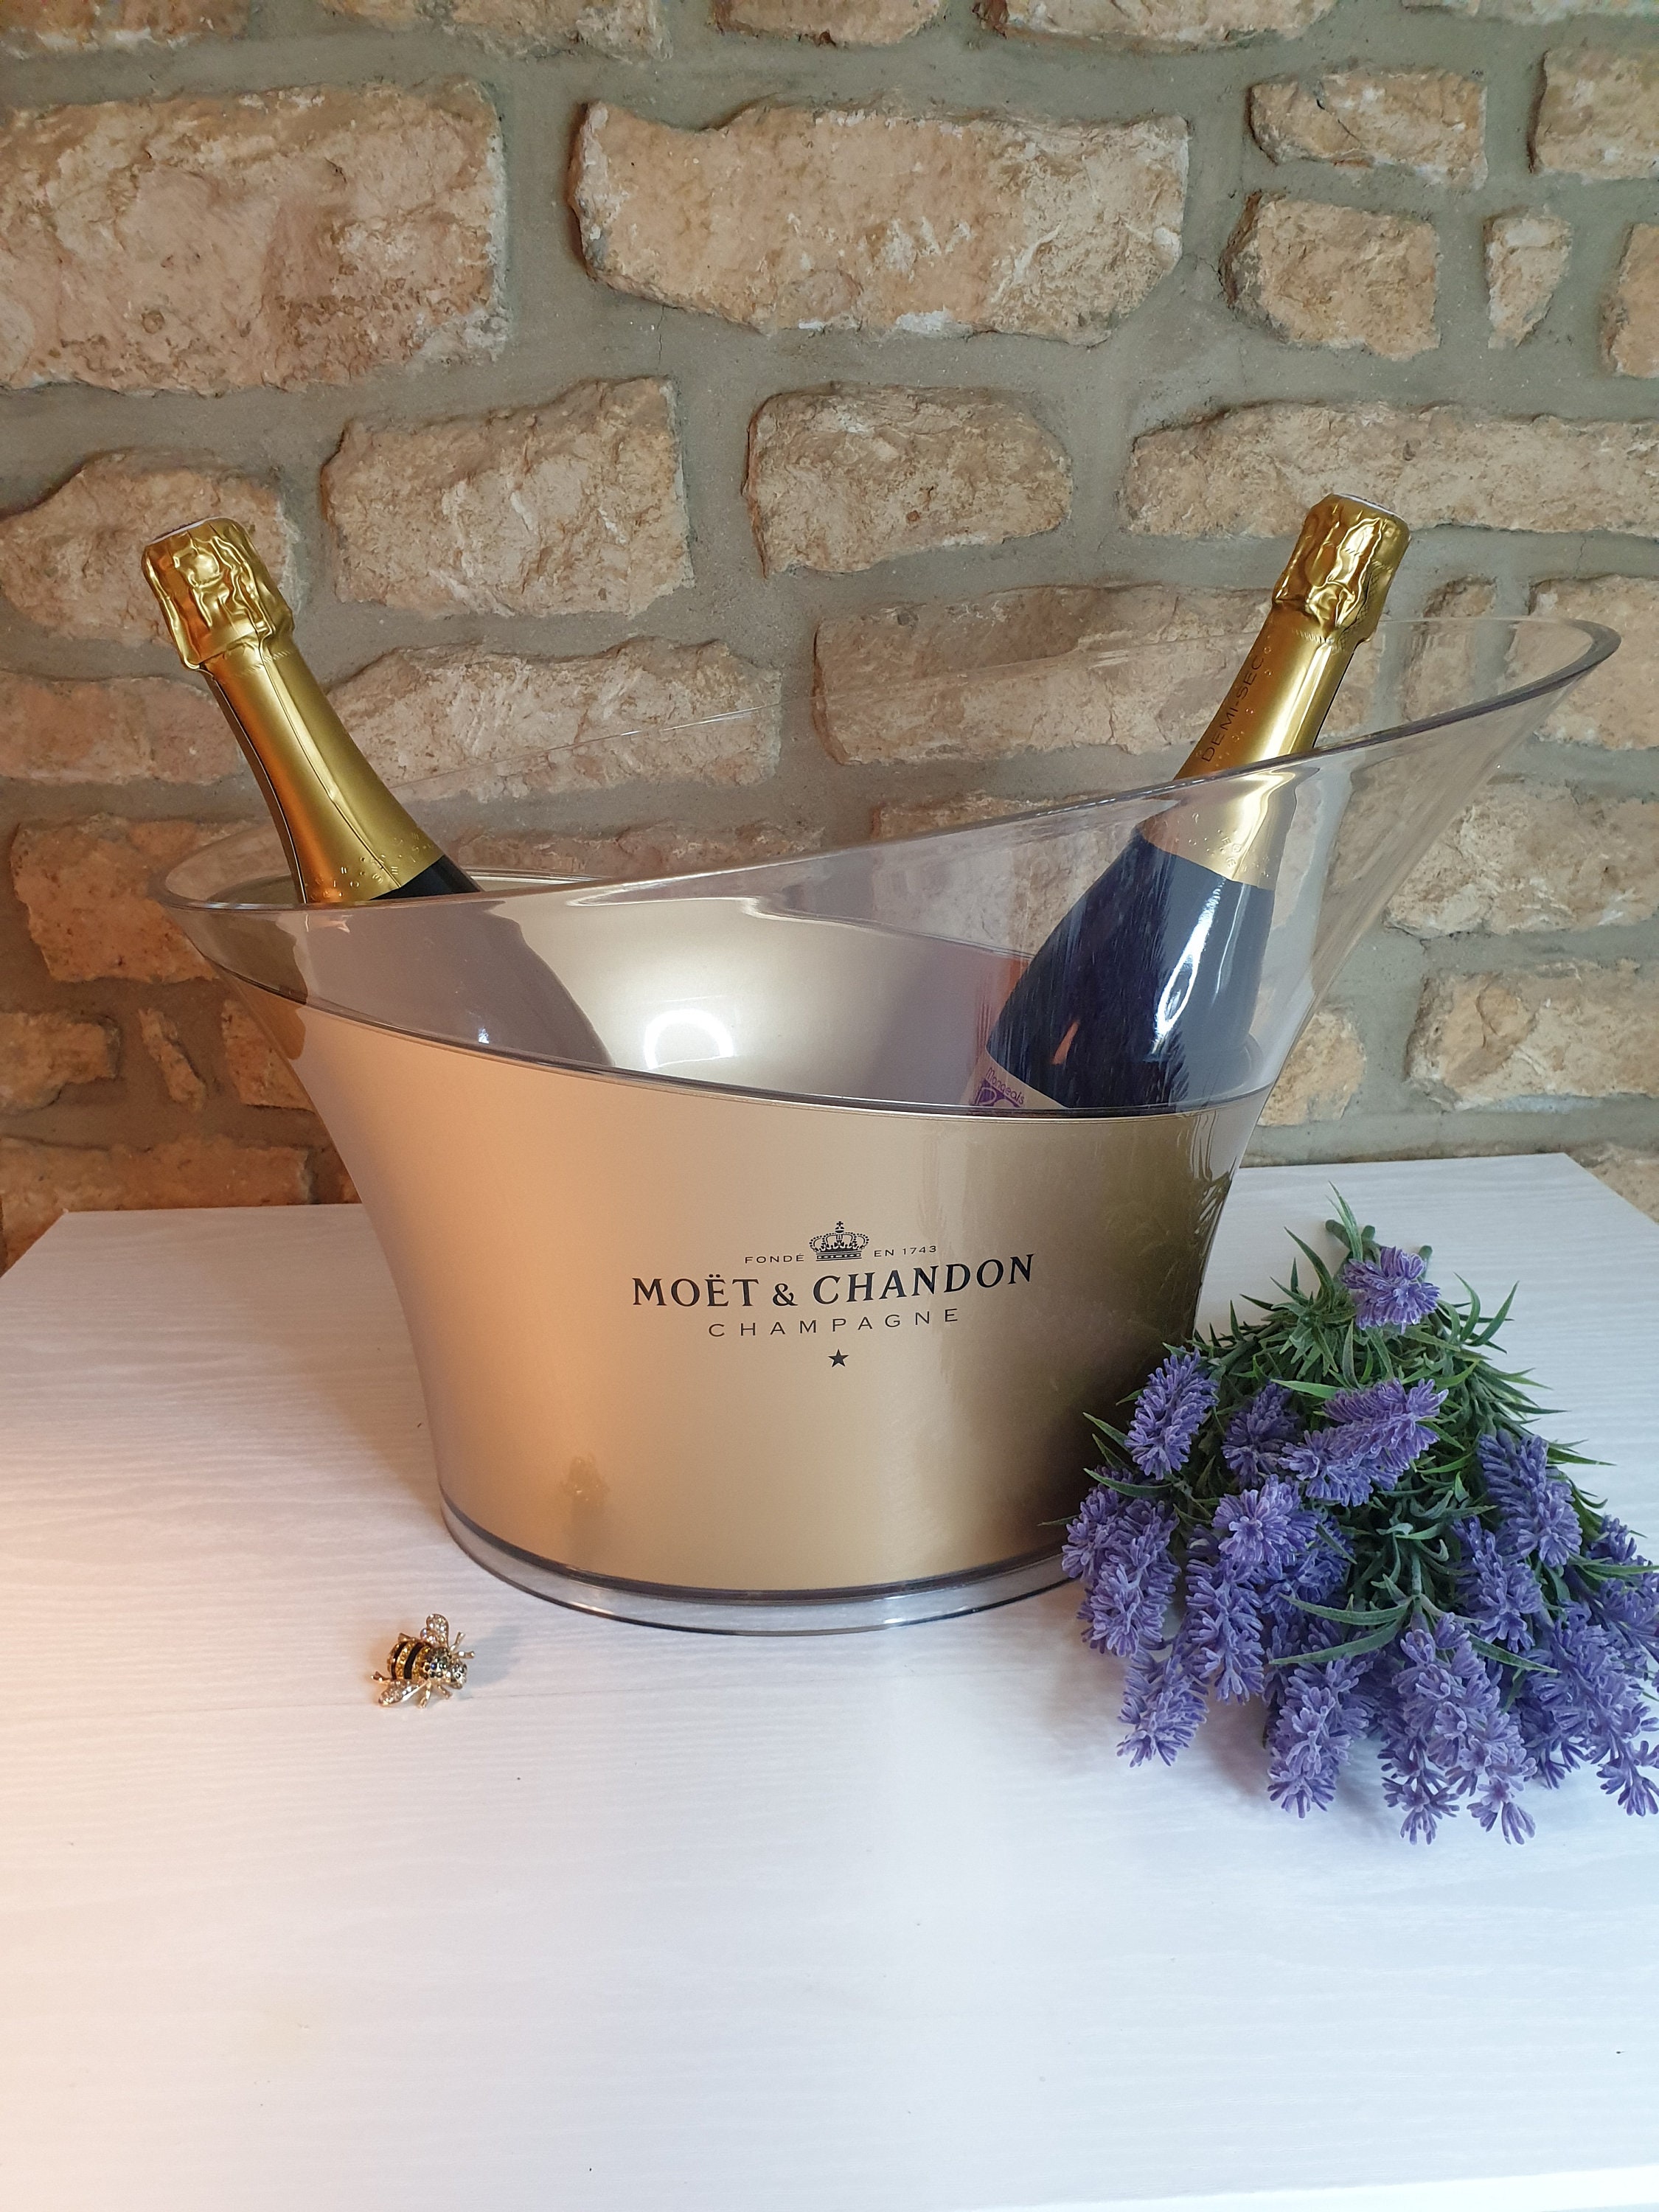 Moet & Chandon Brut with 'So Bubbly' Bath Ice Bucket, Champagne, France